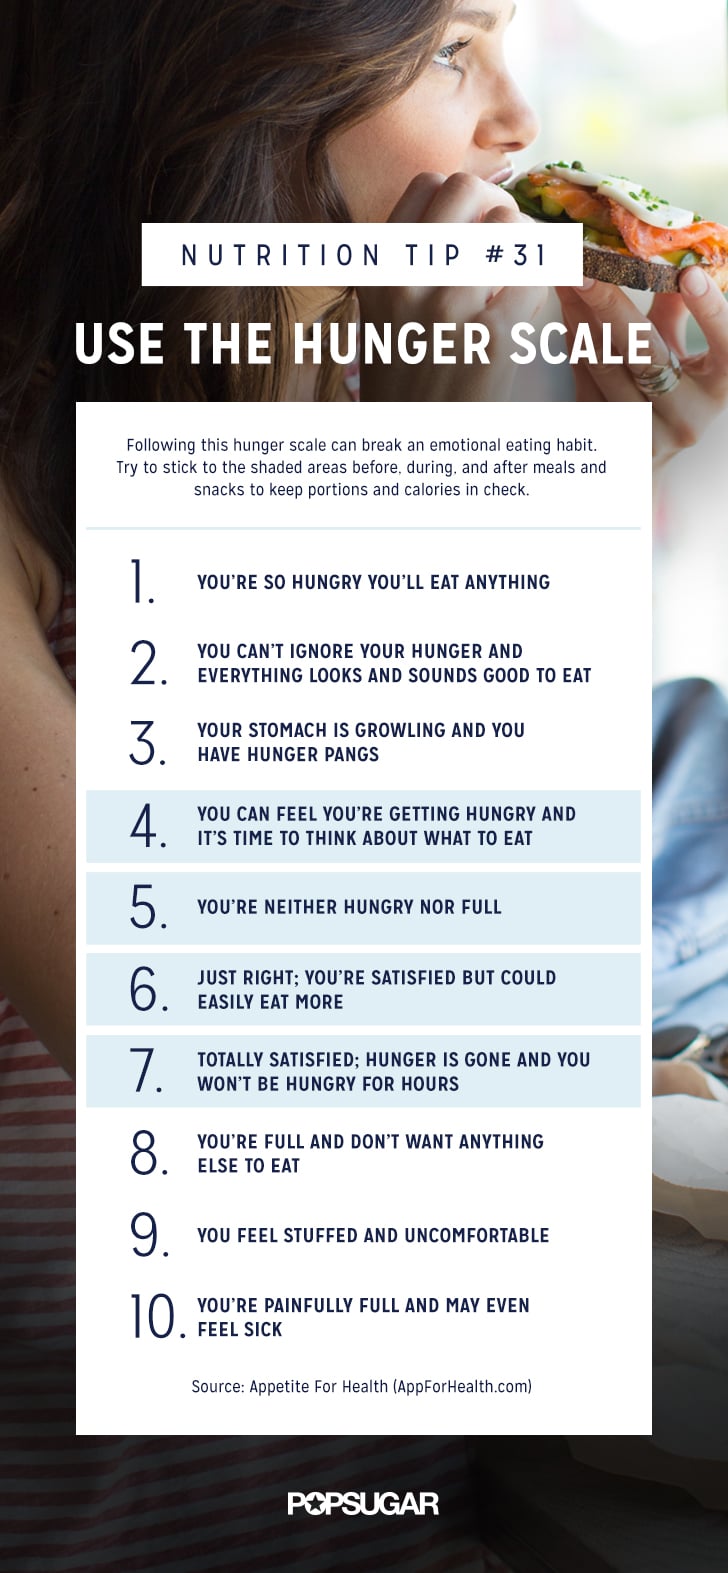 Use the Hunger Scale